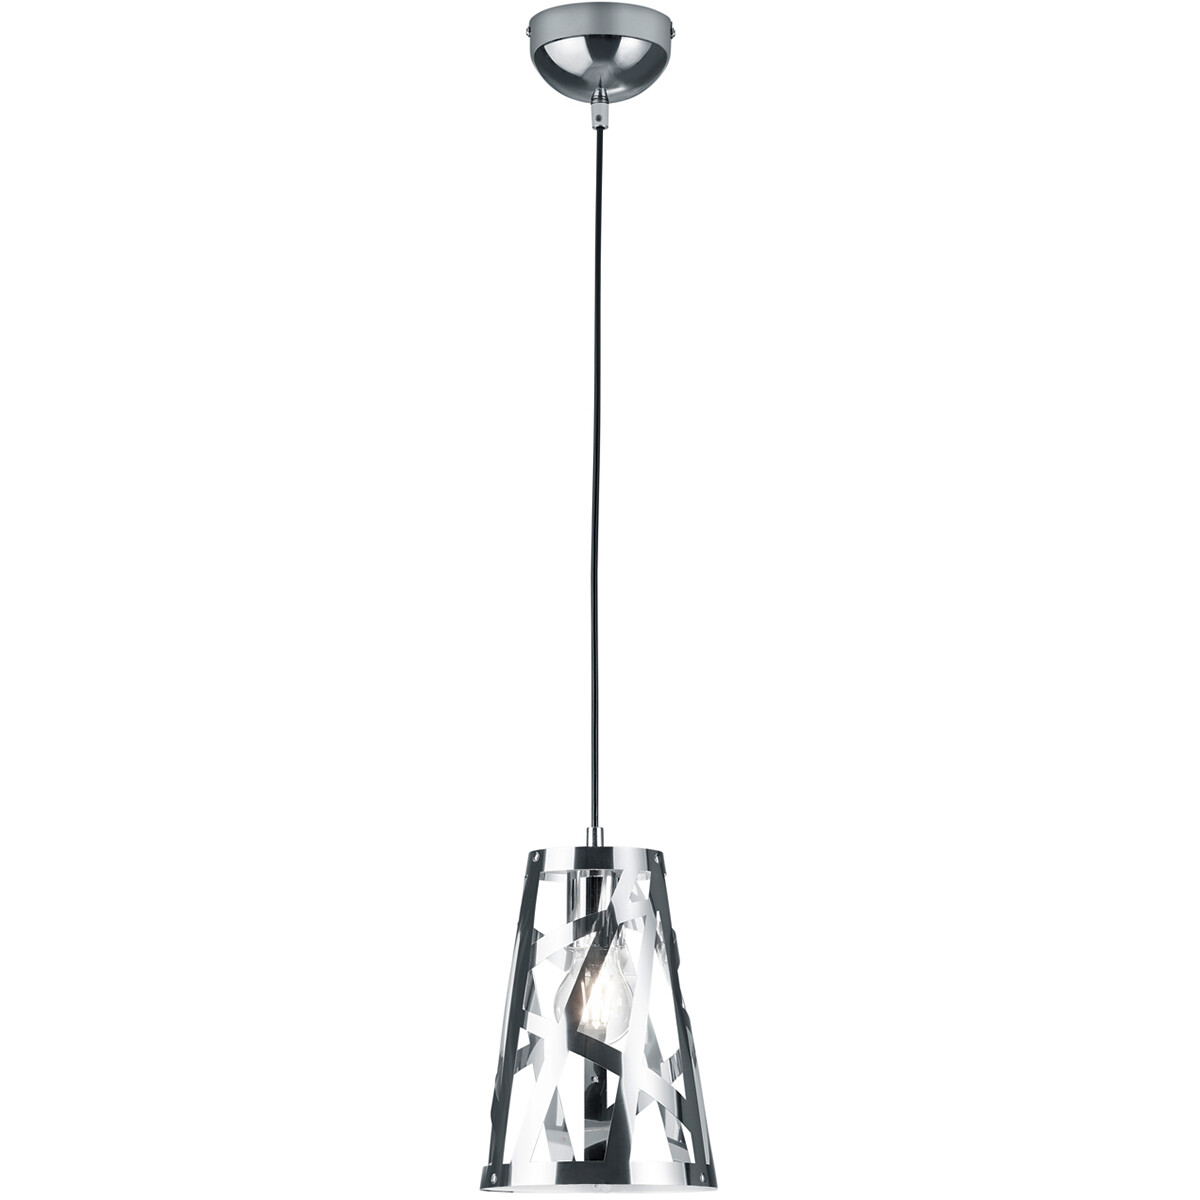 LED Hanglamp - Trion Carlan - E27 Fitting - 1-lichts - Rond - Mat Chroom - Aluminium product afbeelding